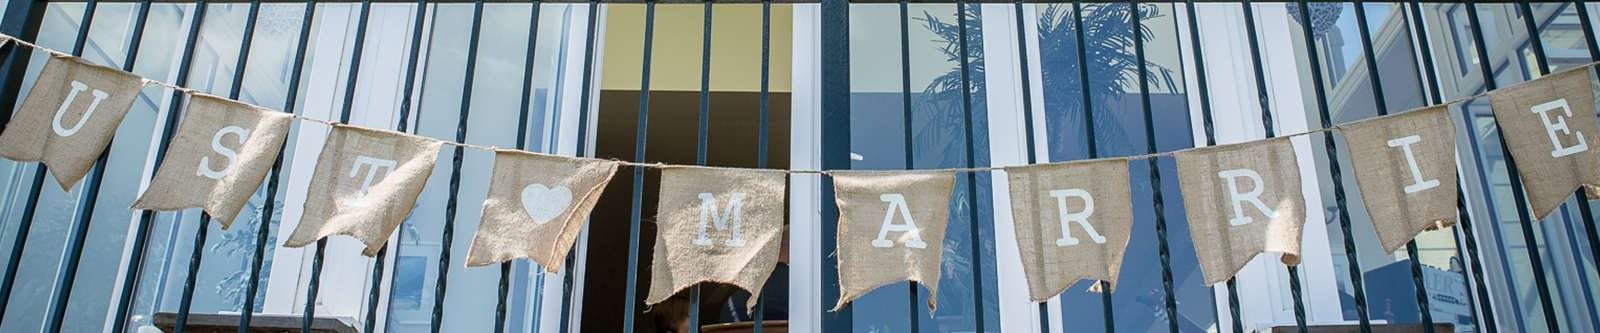 Just Married bunting